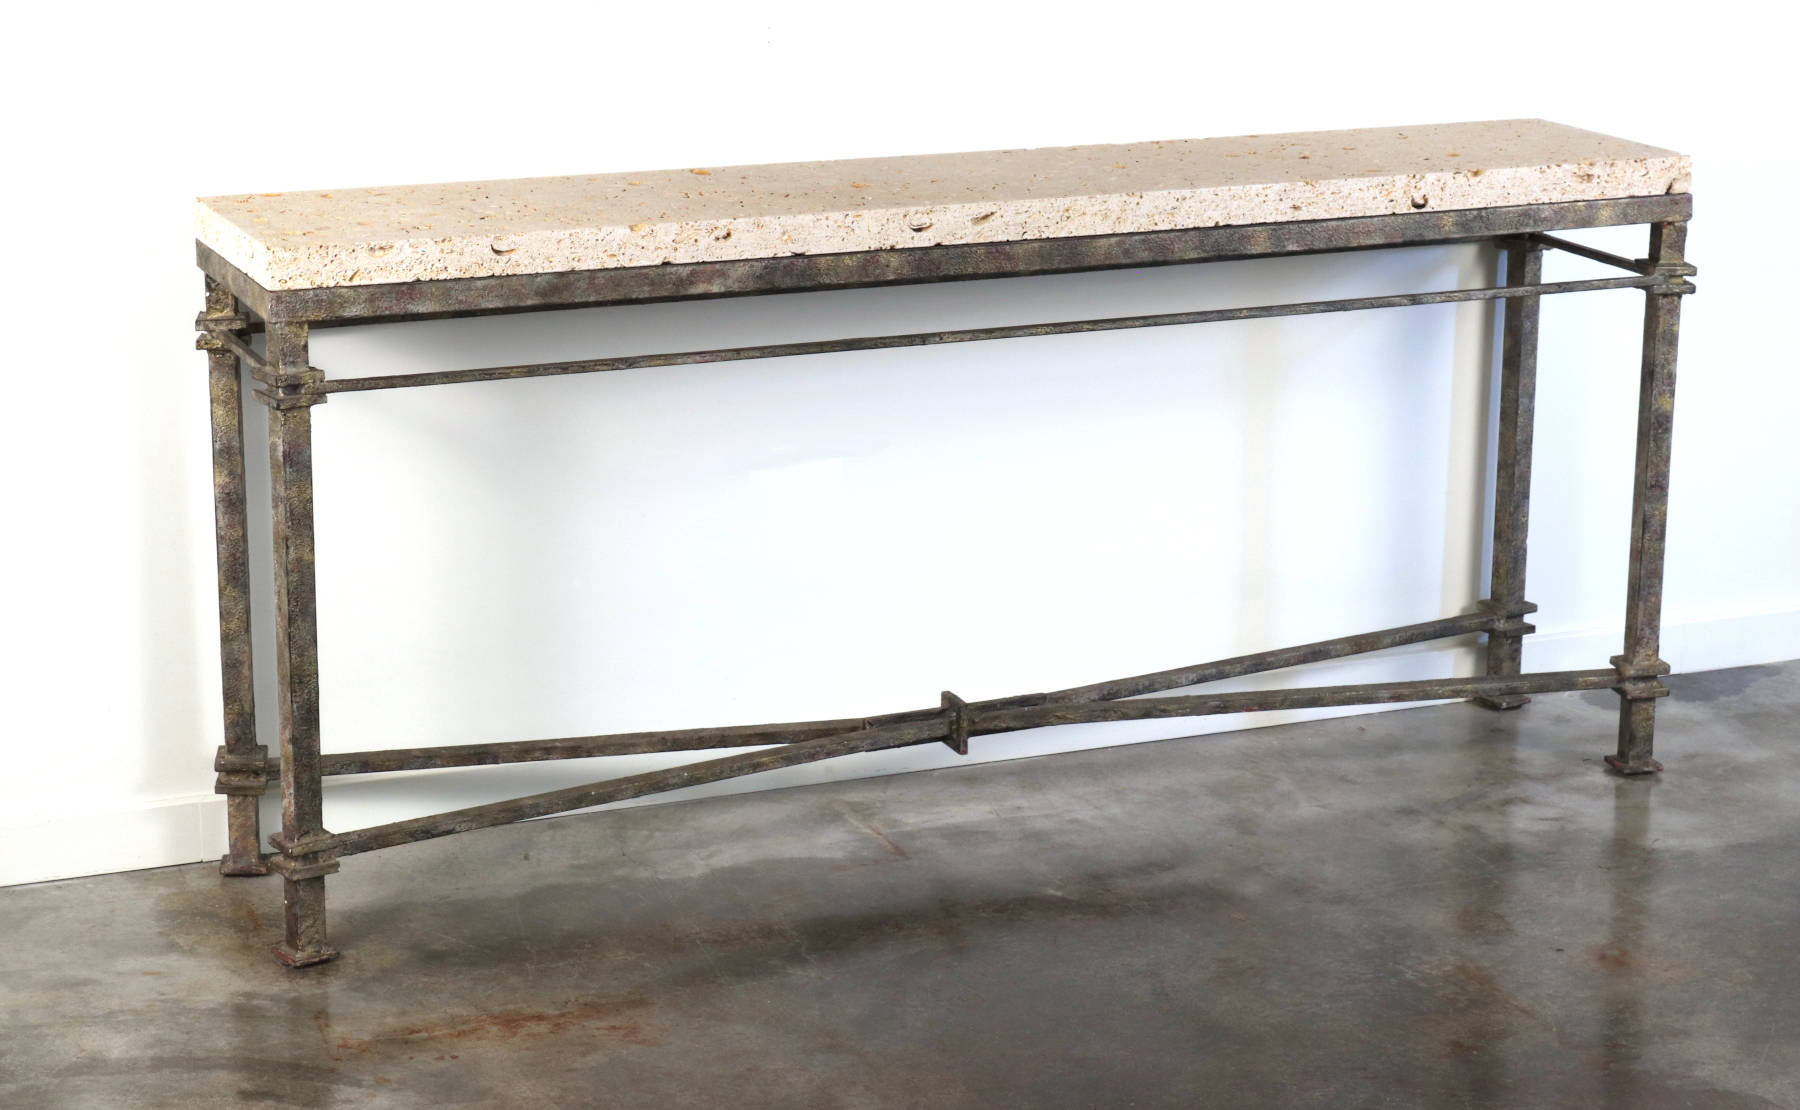 Modernist Iron Console Table, 20th c.